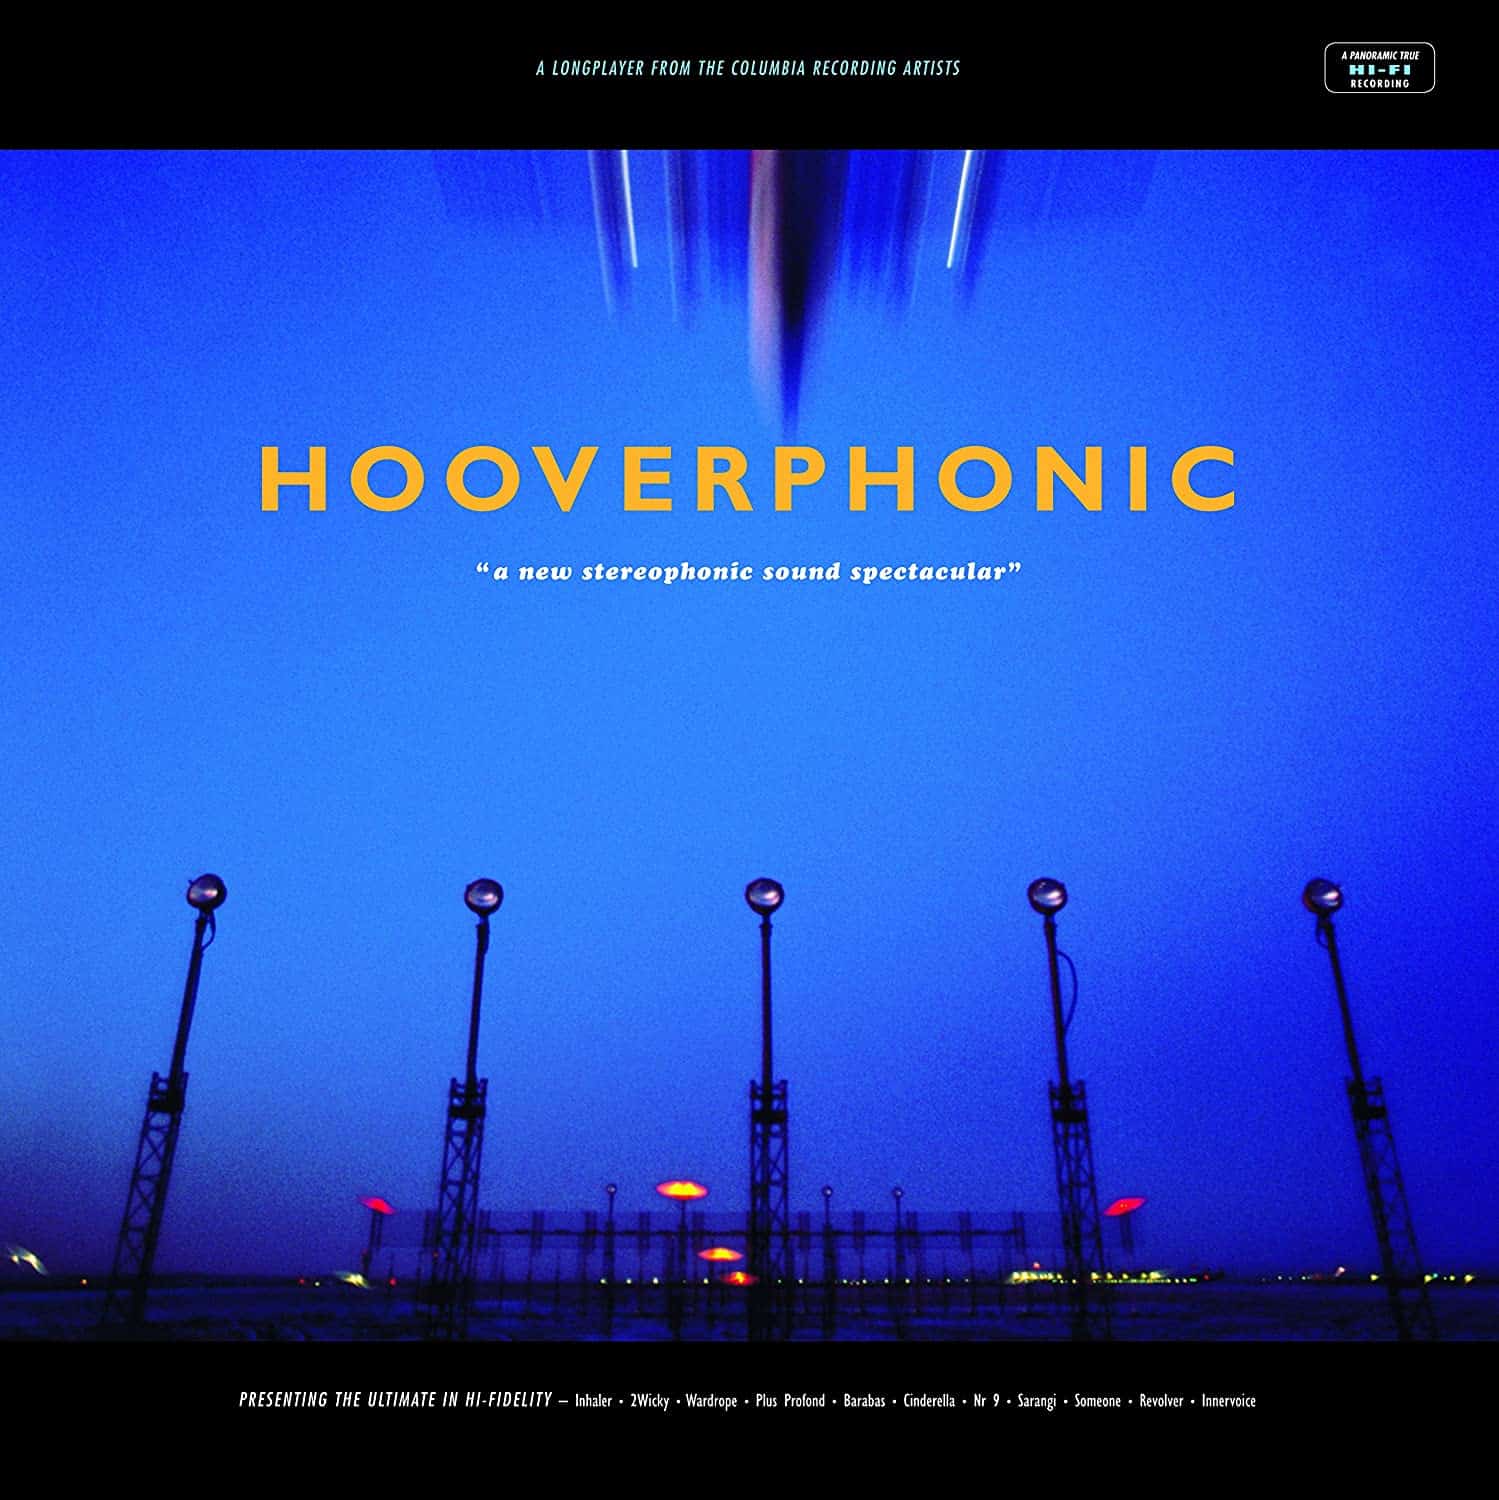 HOOVERPHONIC - A NEW STEREOPHONIC SOUND SPECTACULAR